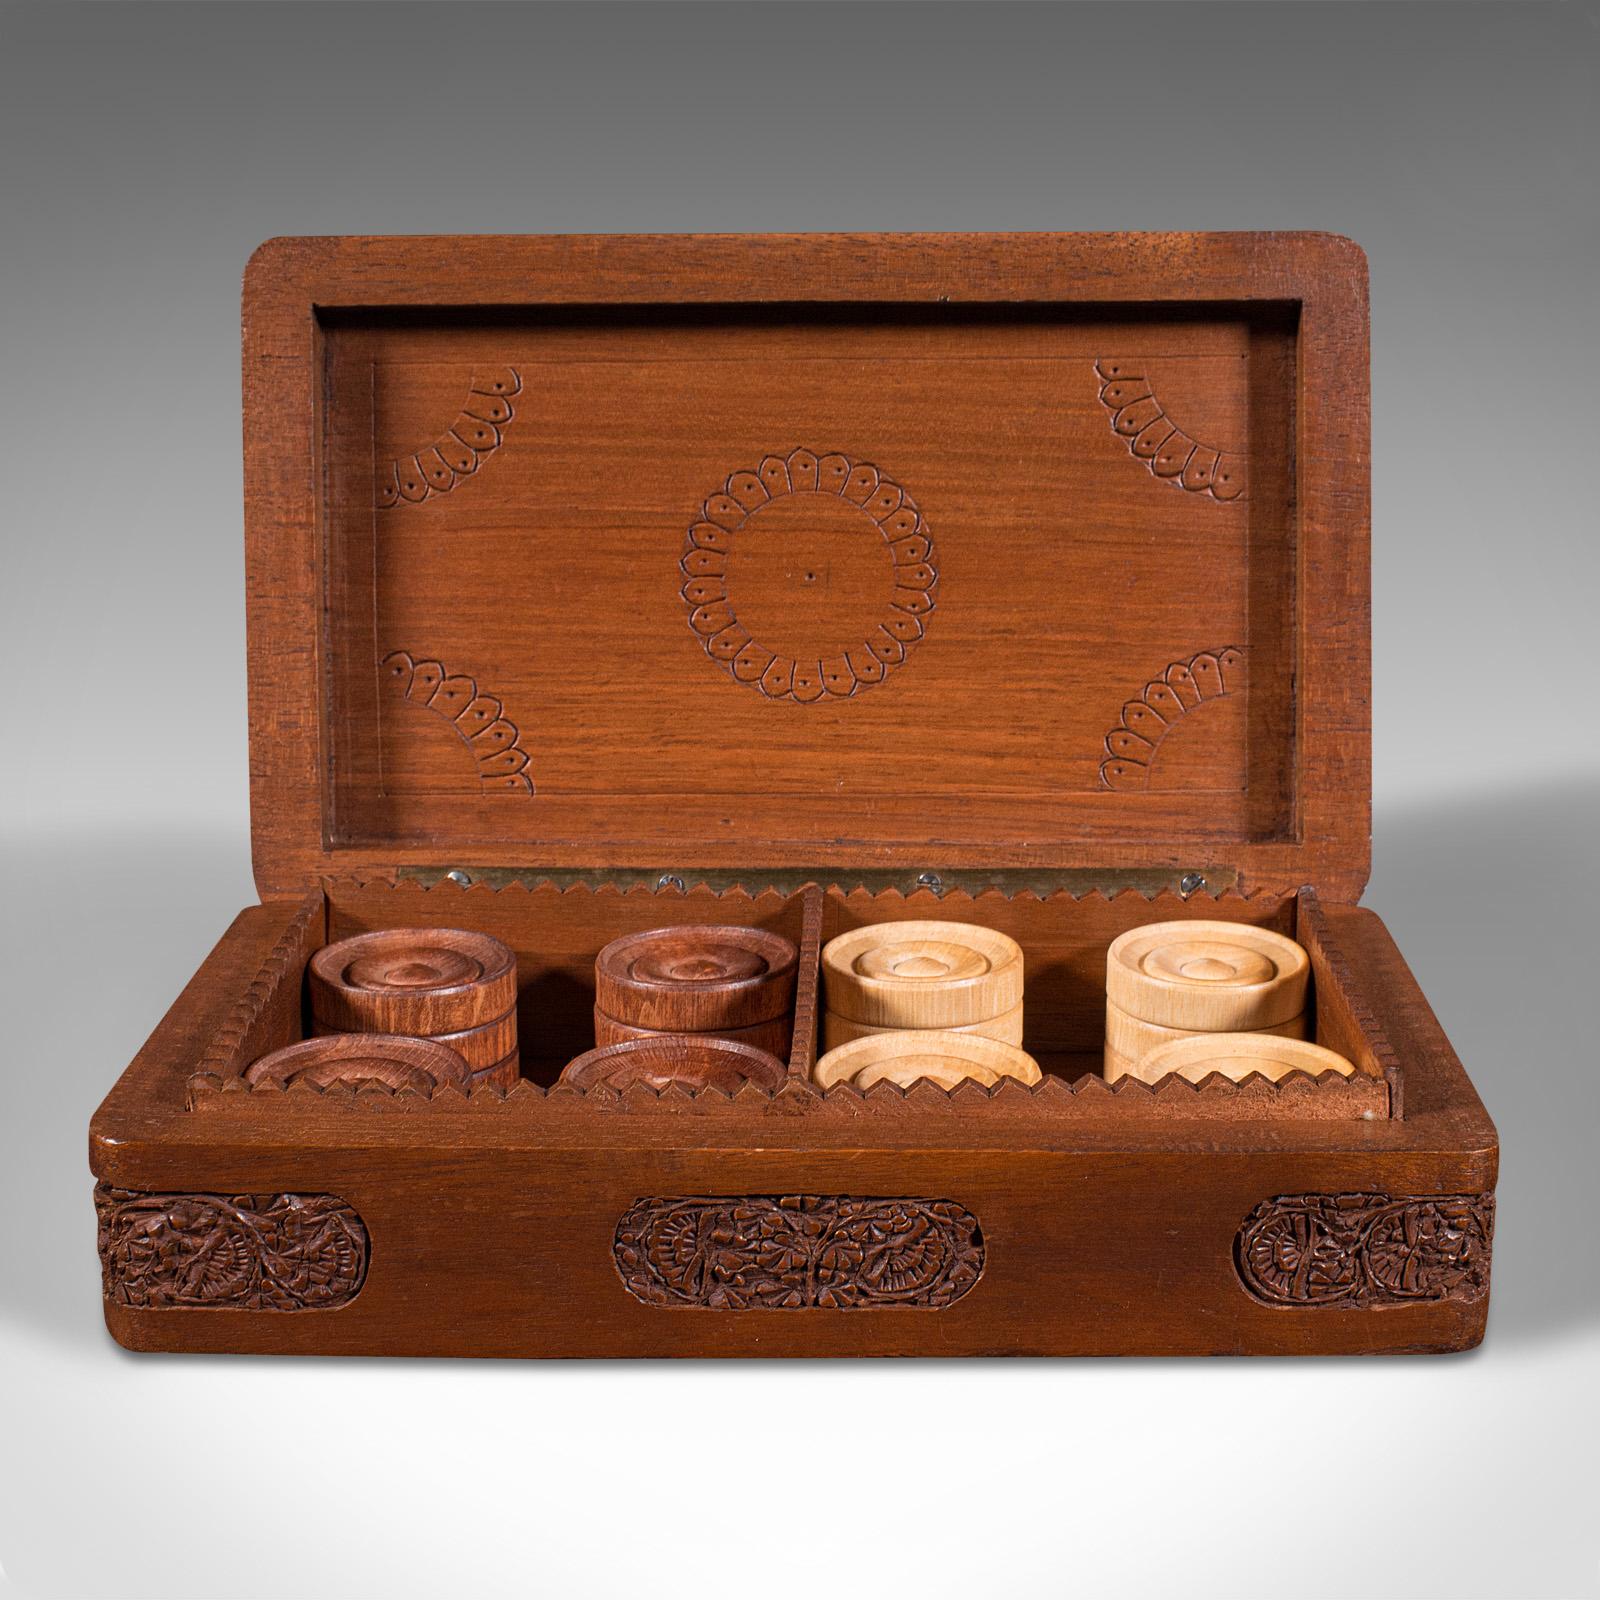 This is a set of vintage gentleman's club draughts pieces. An Oriental, mahogany game counter and carry case, dating to the late Art Deco period, circa 1940.

Pleasingly presented set of 24 draughts game pieces
Displays a desirable aged patina